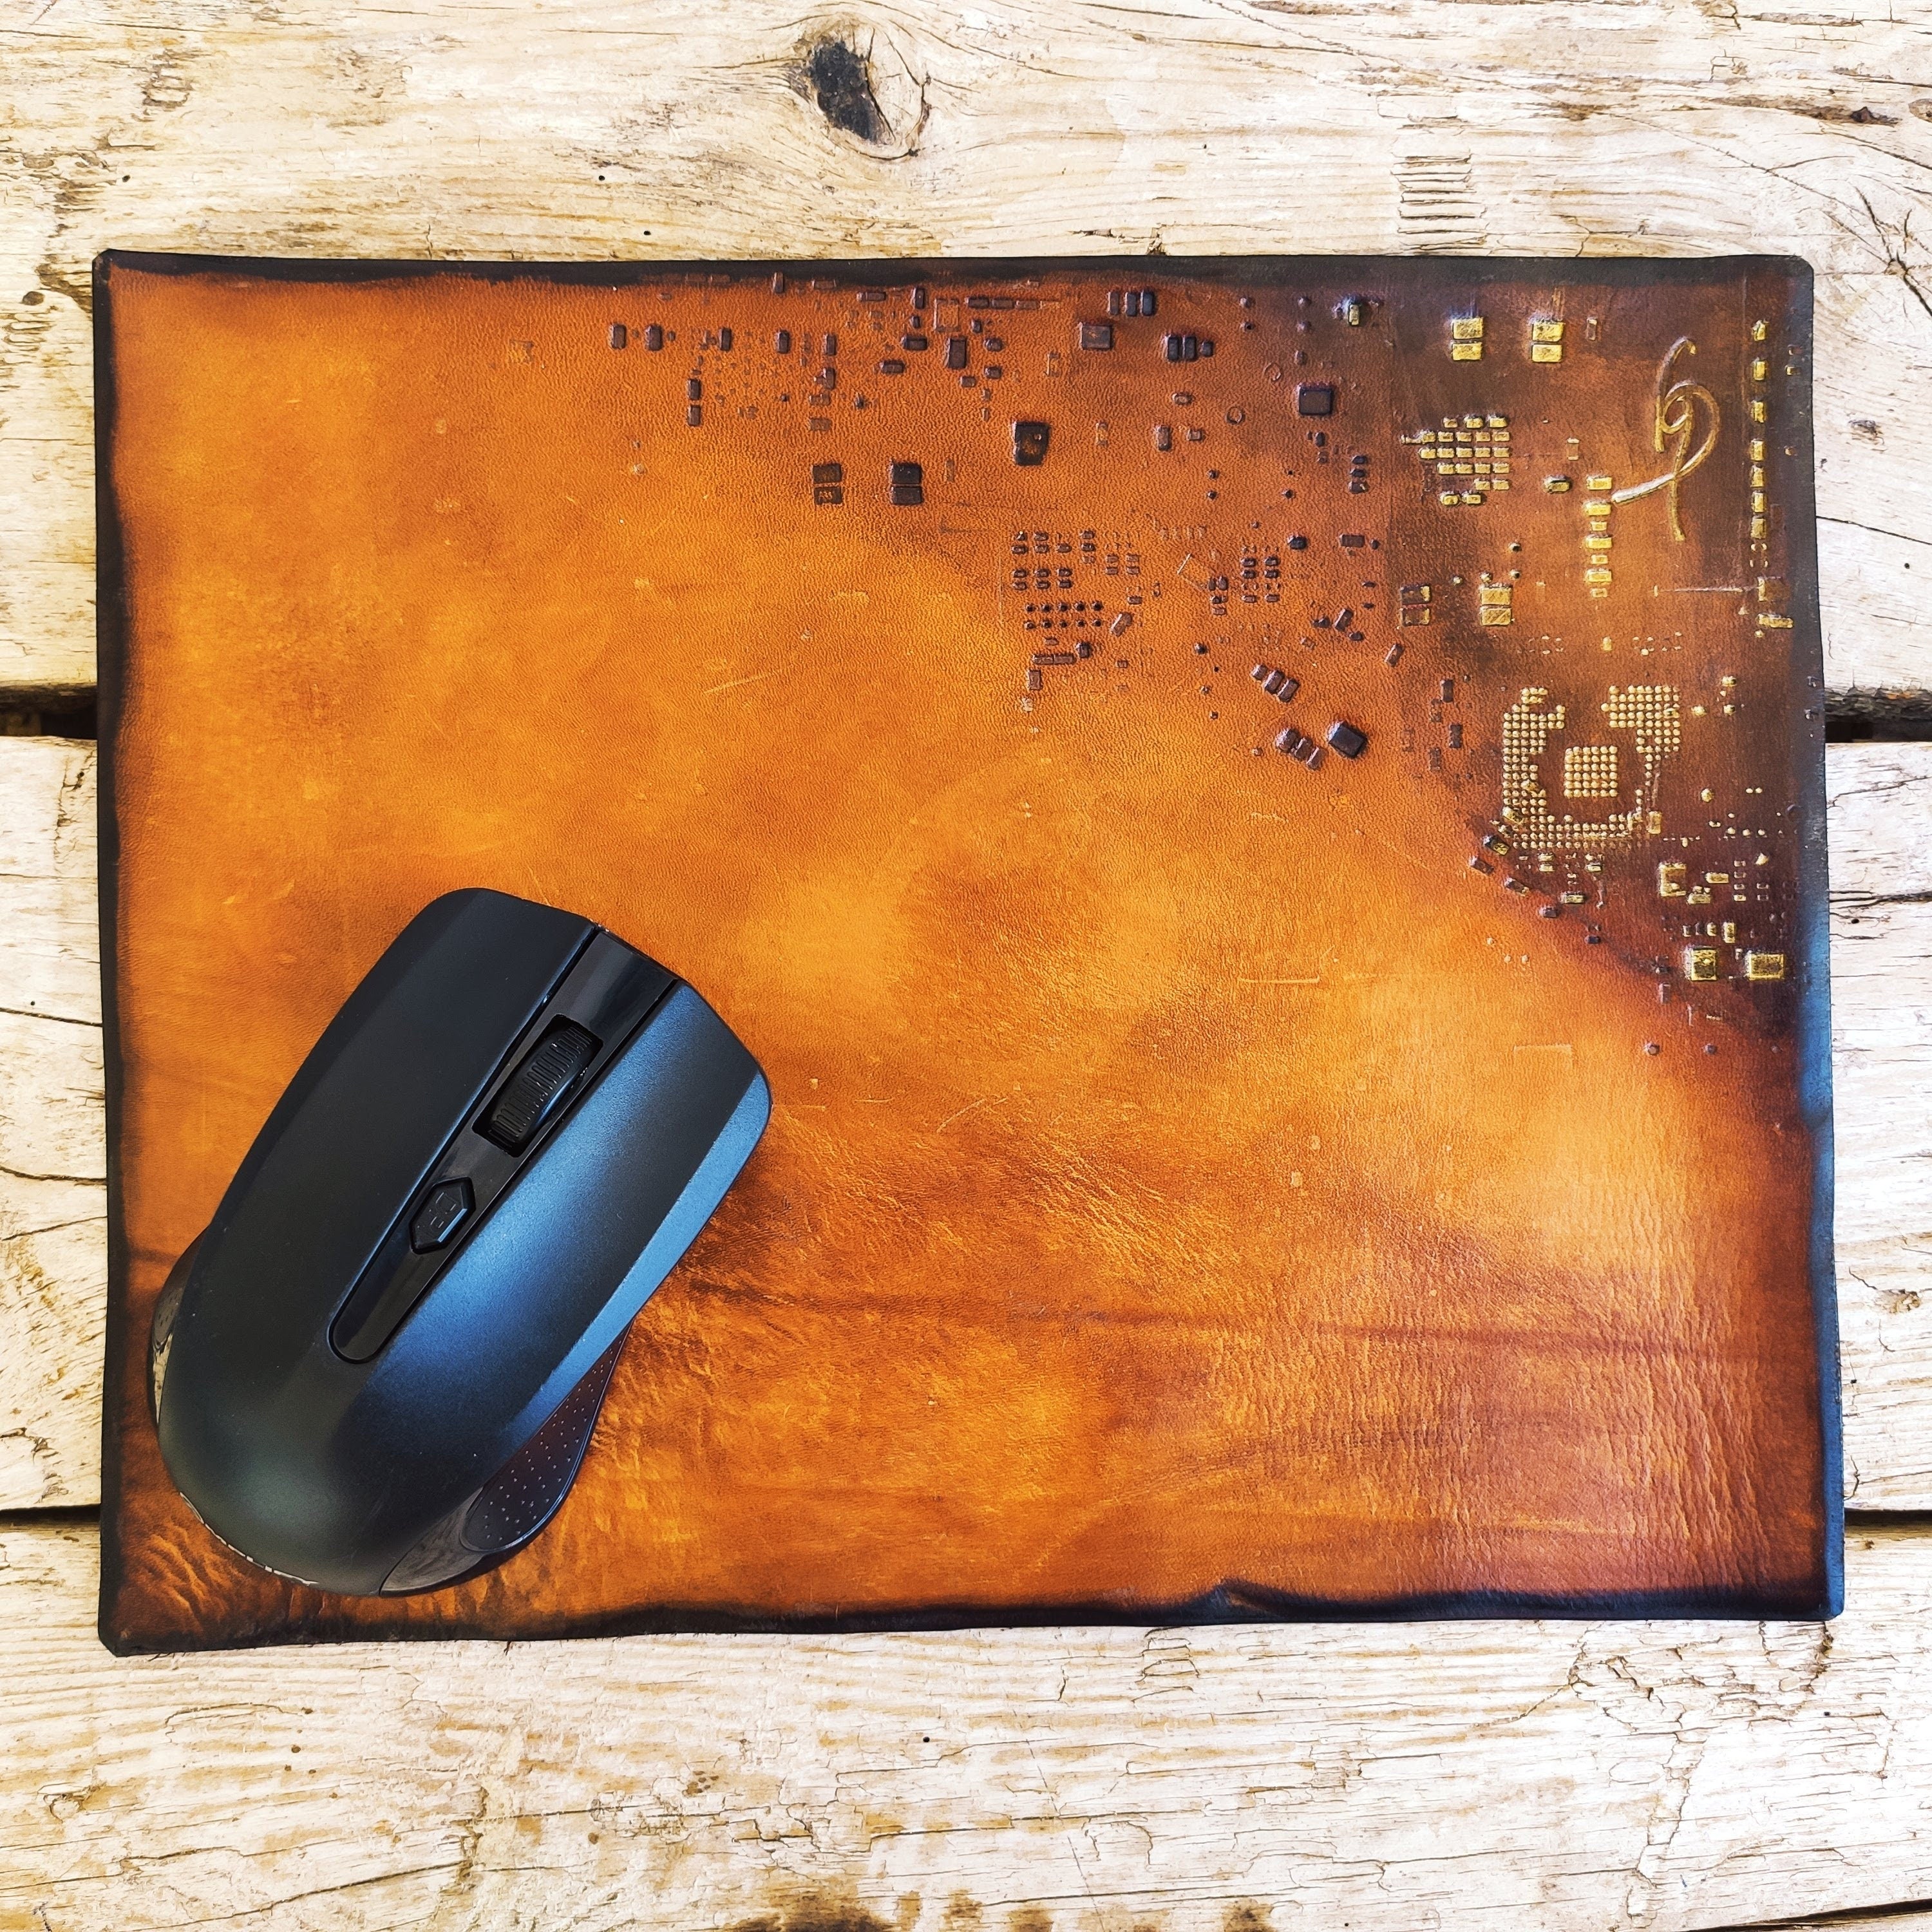 Personalized Leather Mousepad in shades of Brown with gold stamping of Computer parts made by hand, perfect Gift for the Office or for WFH